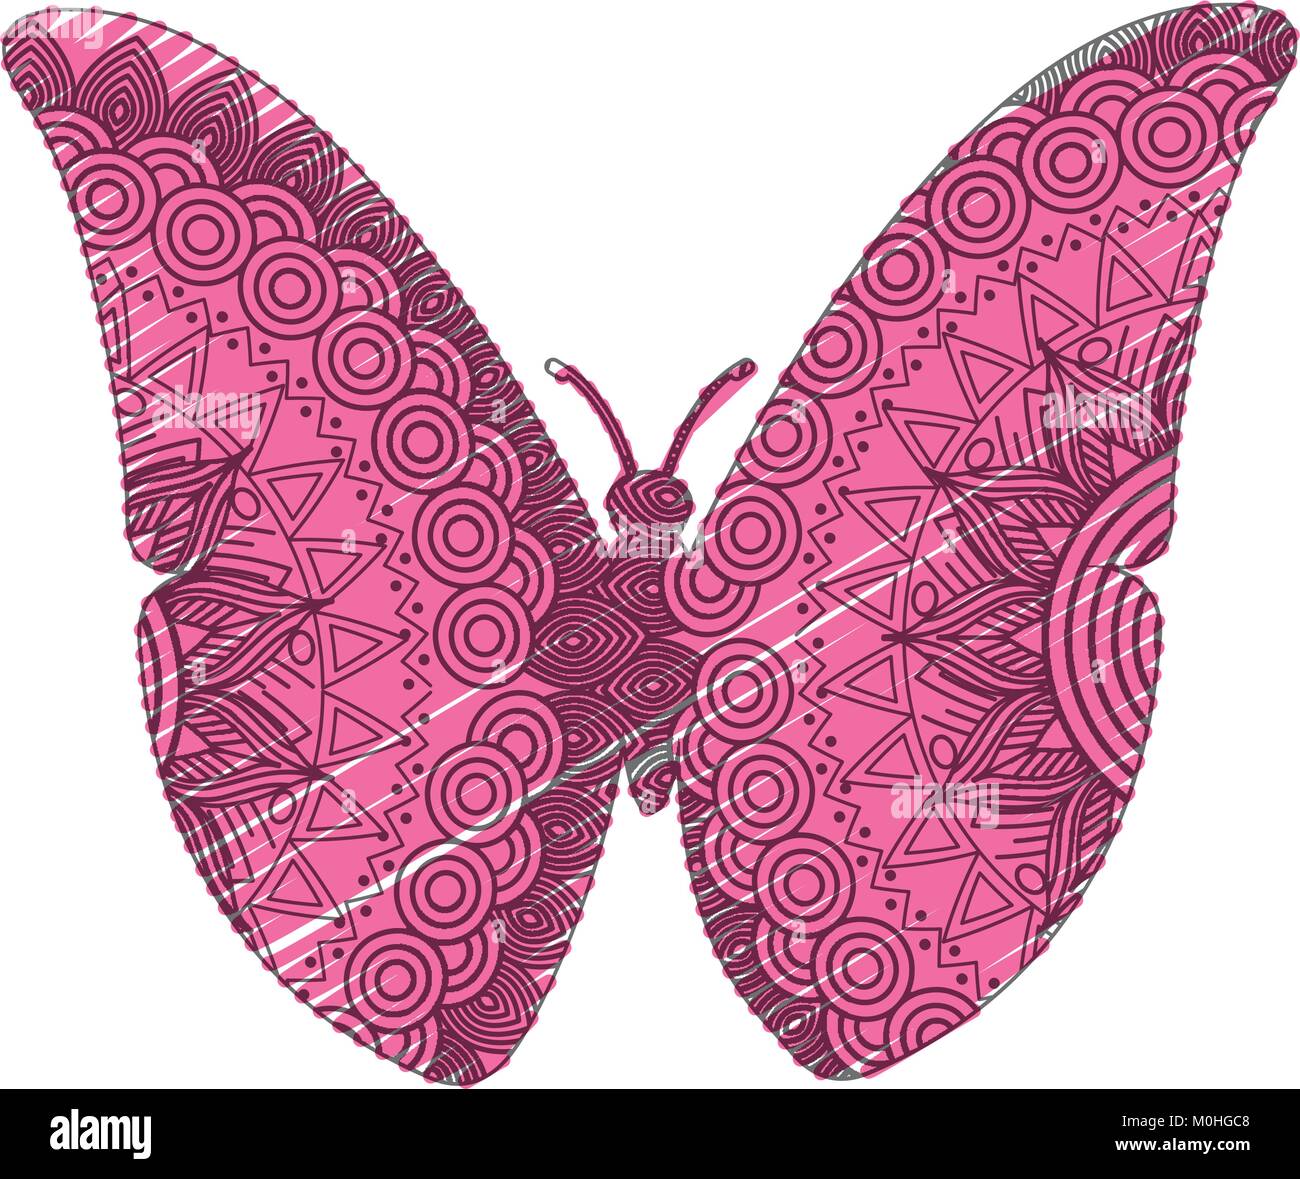 920 Zentangle Butterfly Coloring Pages , Free HD Download